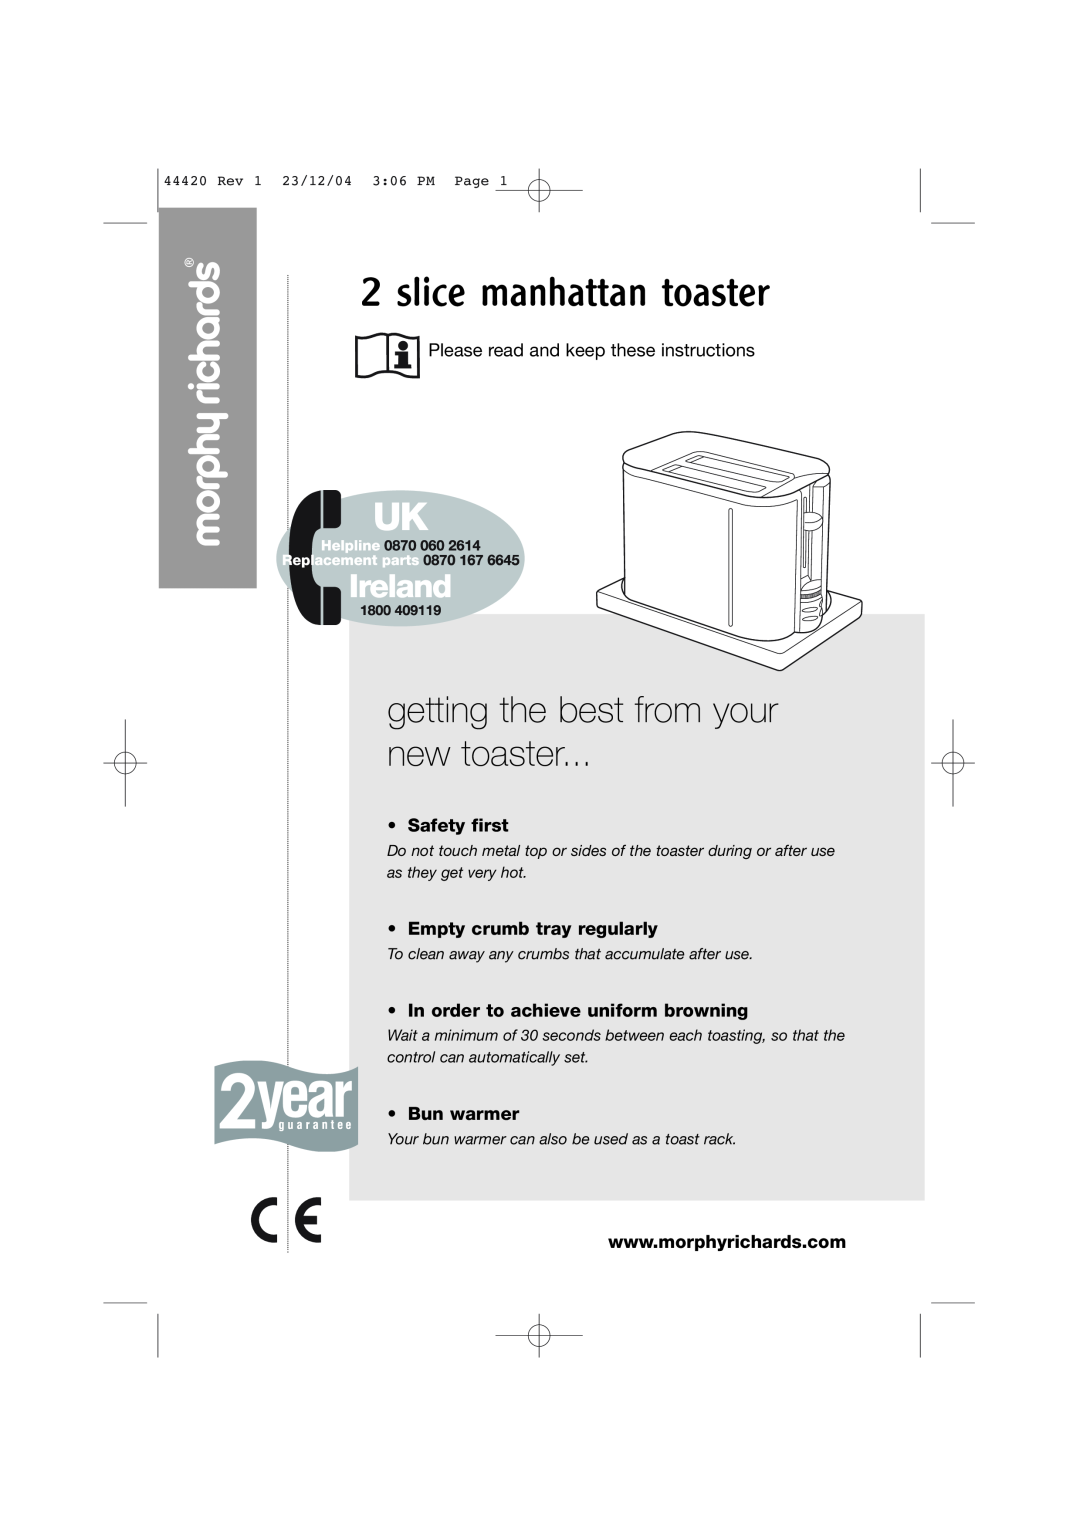 Morphy Richards 2 slice manhattan toaster manual getting the best from your new toaster, Safety first, Bun warmer 